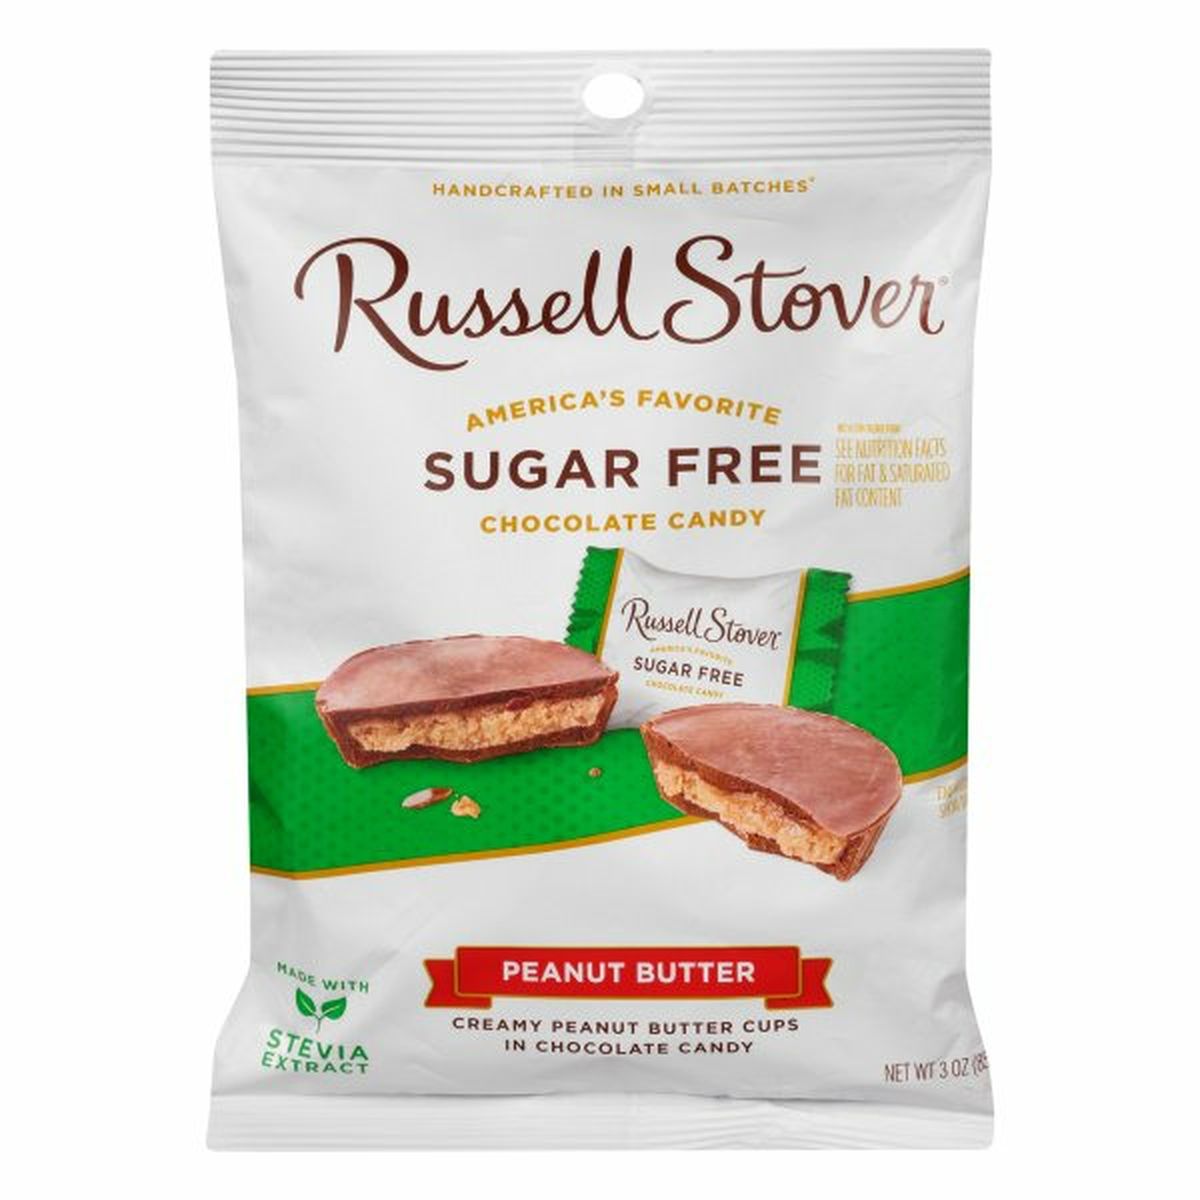 Calories in Russell Stover Chocolate Candy, Sugar Free, Peanut Butter